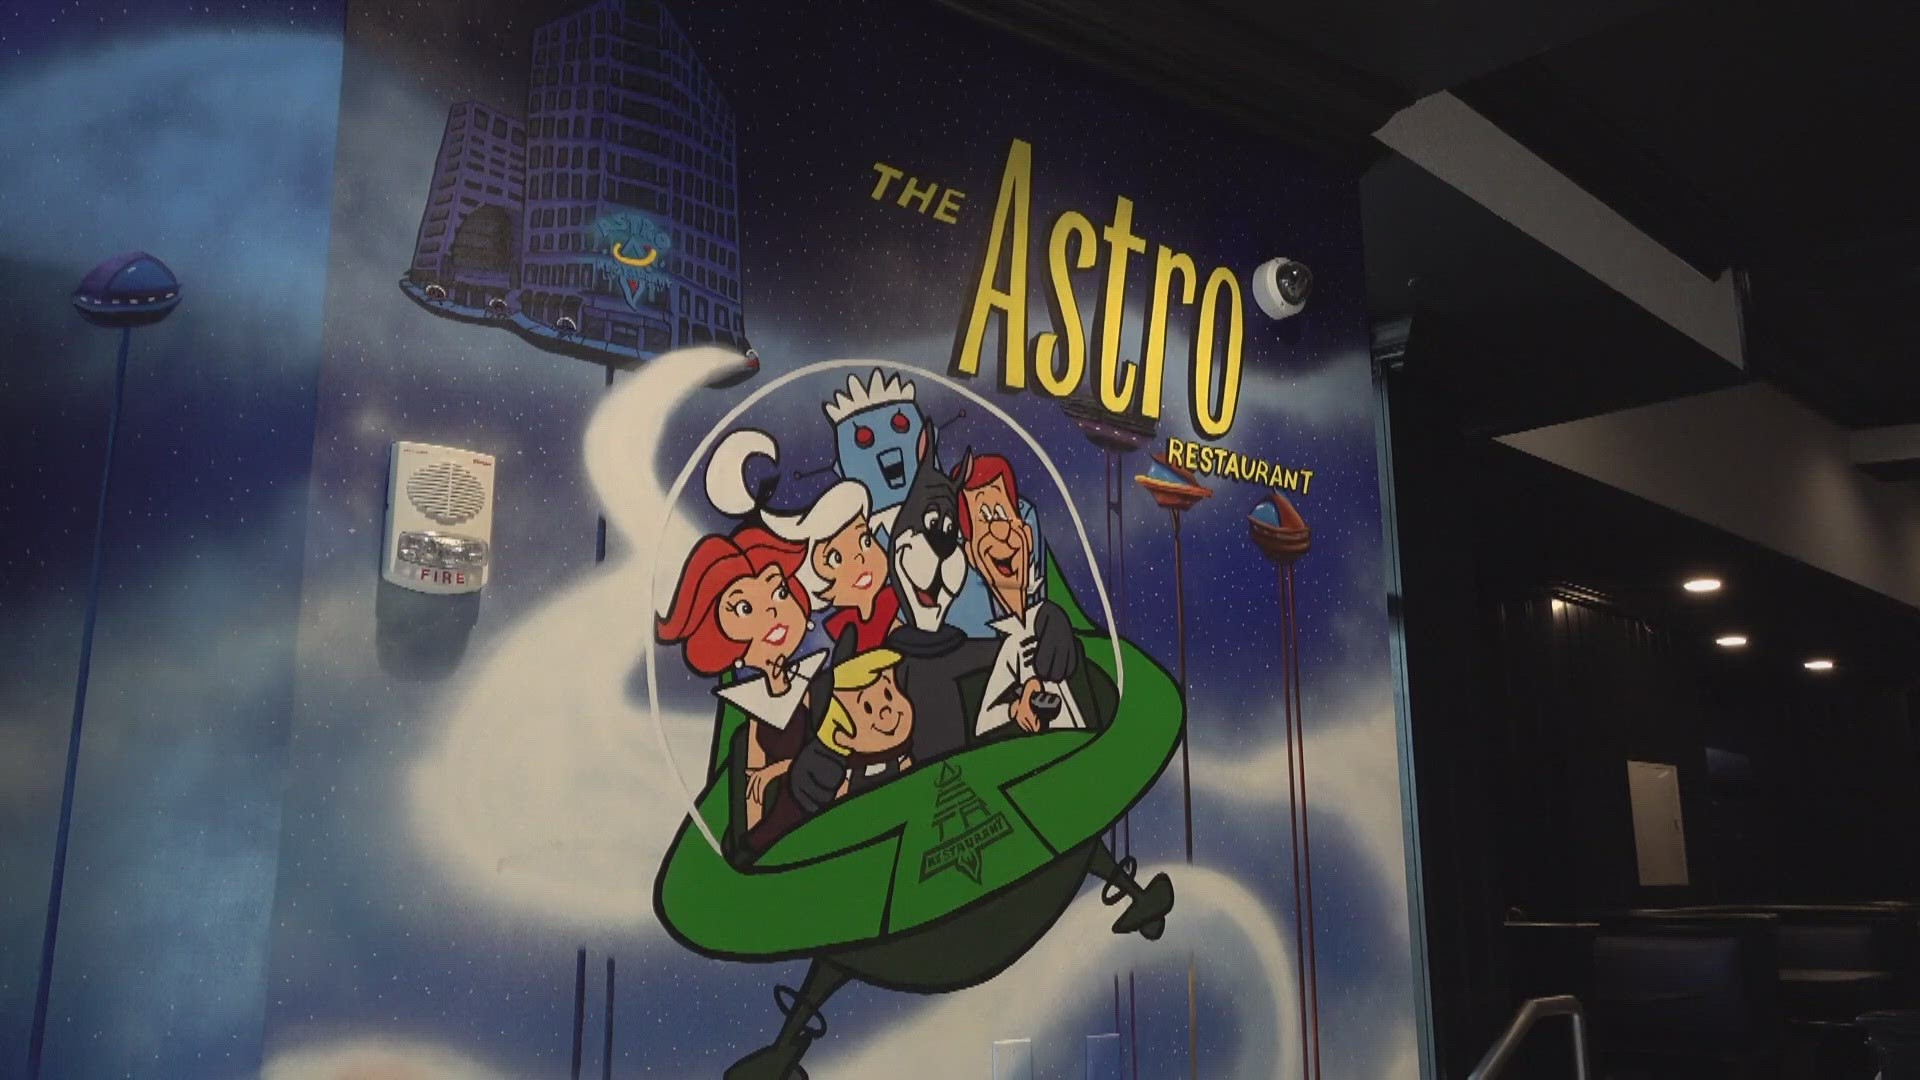 The Astro Restaurant, which opens April 23, takes over space that has been vacant for the last eight years.